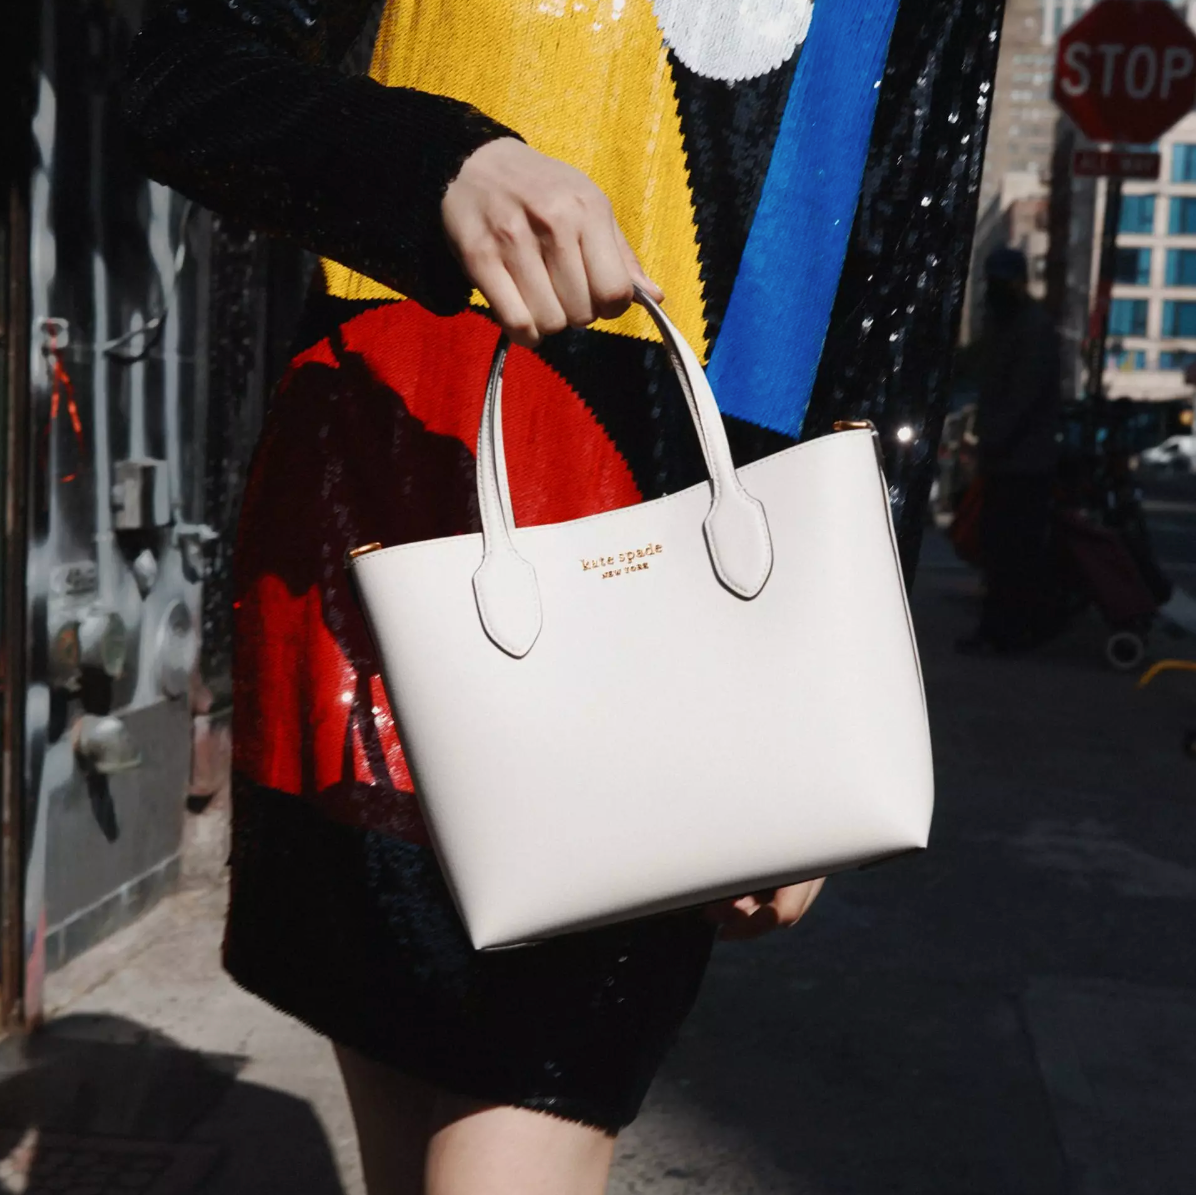 Get Up to 40% Off Kate Spade Right Now During Its Sale